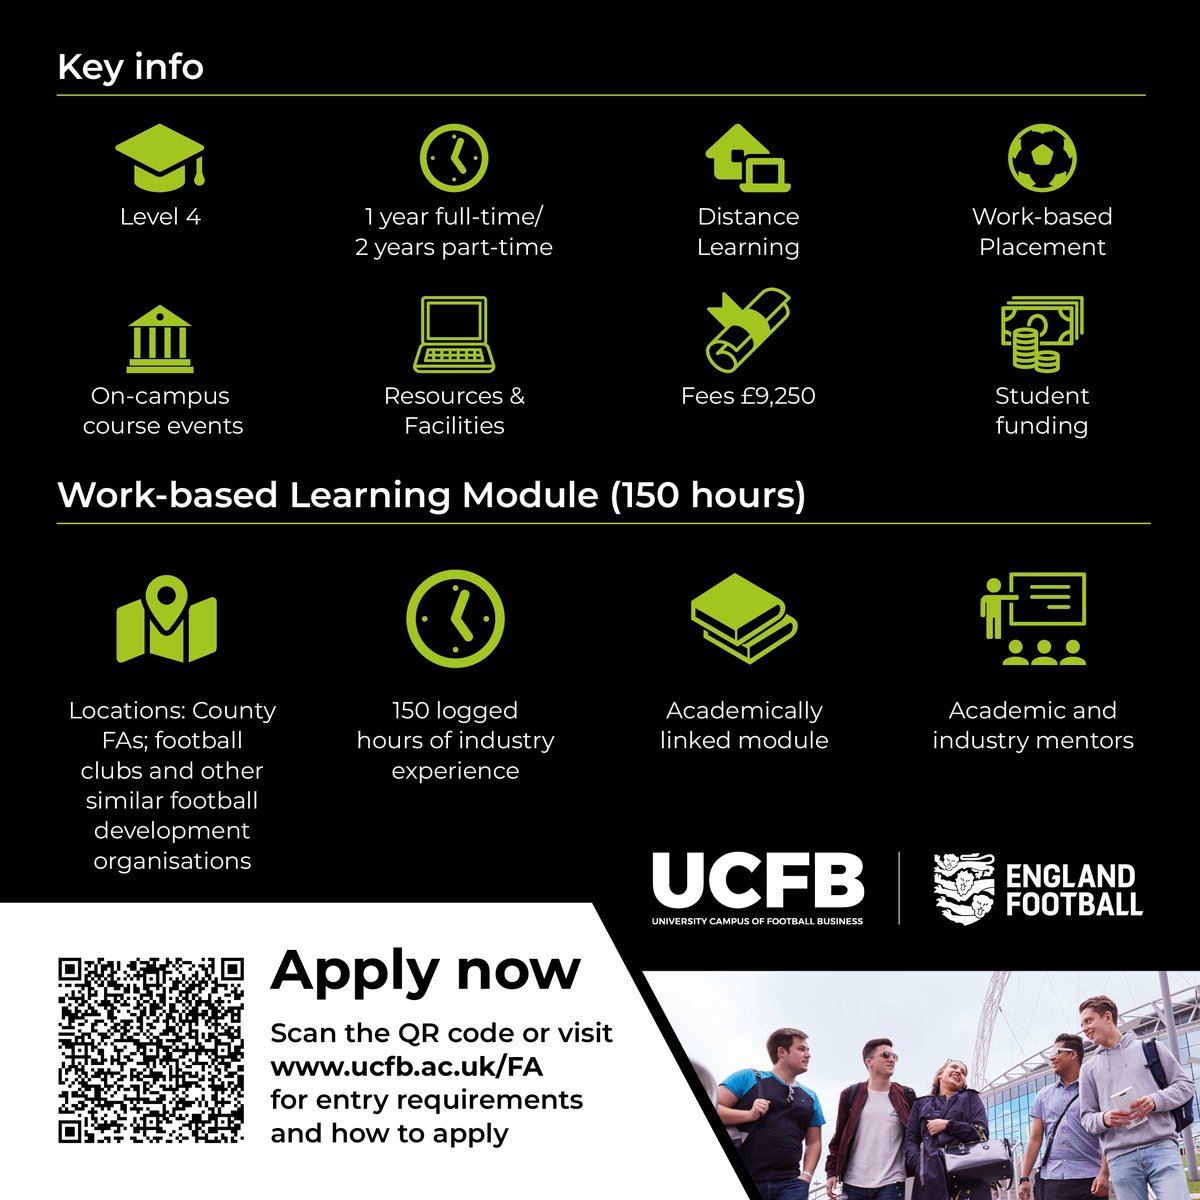 .@UCFB has launched a new Certificate of HE in collaboration with @Englandfootball and the @FA to support career opportunities within football development 🎓

It includes one year of distance learning, with 150 hours of industry experience.

Read: bit.ly/3Vh6vBW